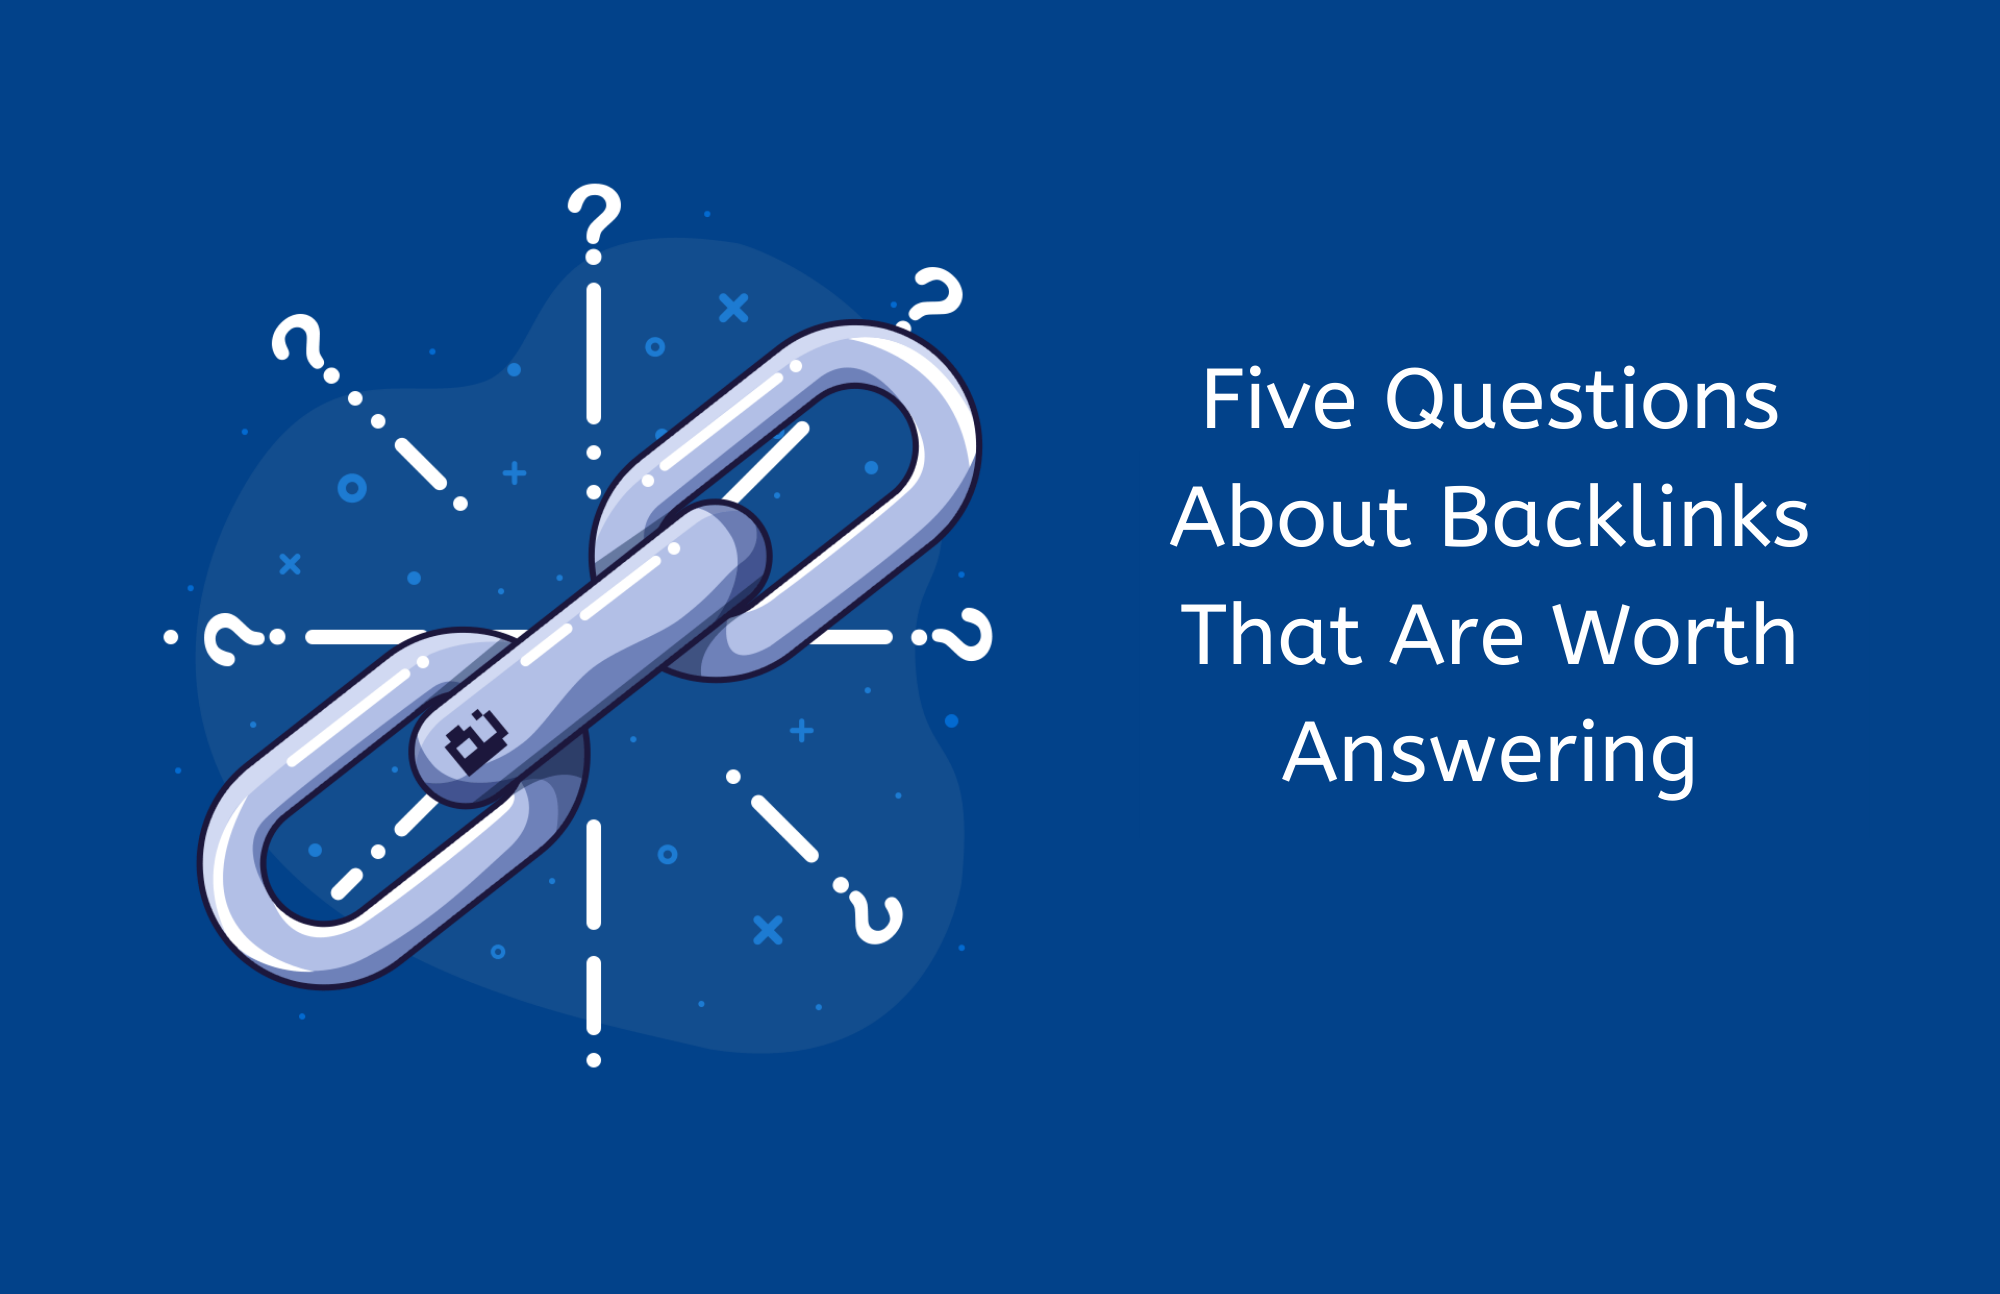 Five Questions About Backlinks That Are Worth Answering